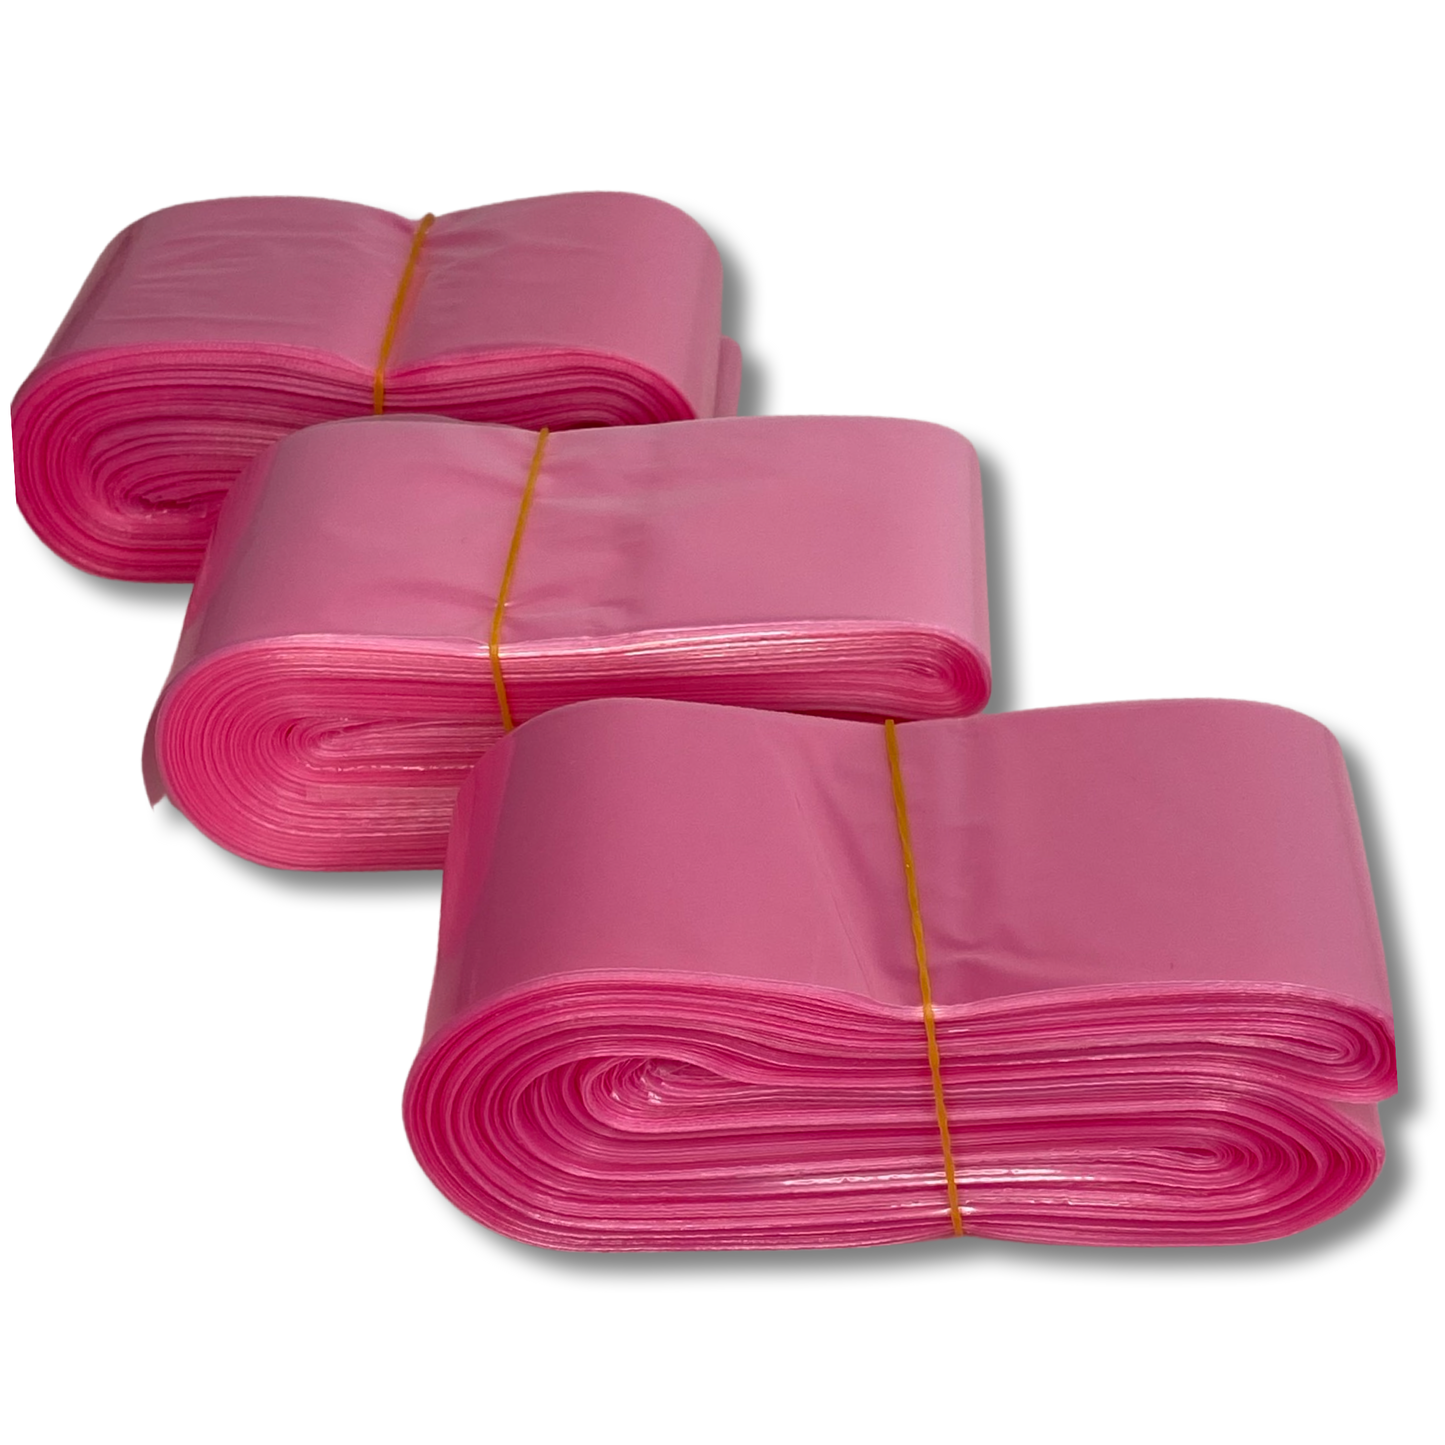 Disposable PINK clip cord sleeve covers for tattoo machine 100 Pack